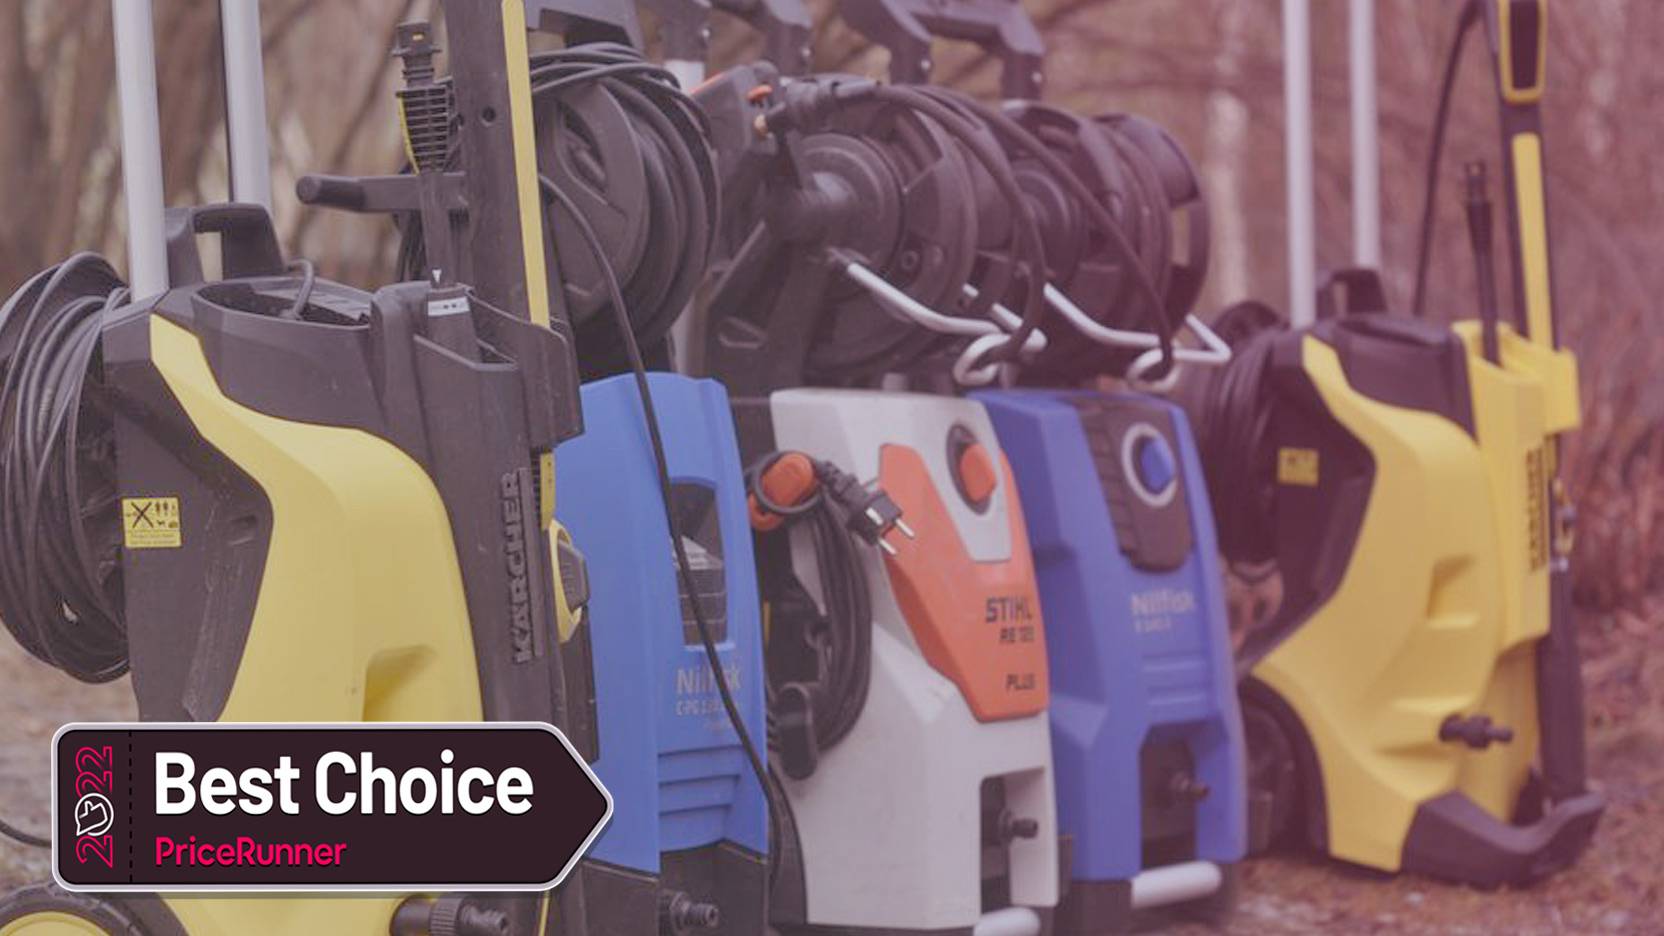 💧Kärcher K7 Pressure Washer Review💧 Tried & Tested! 